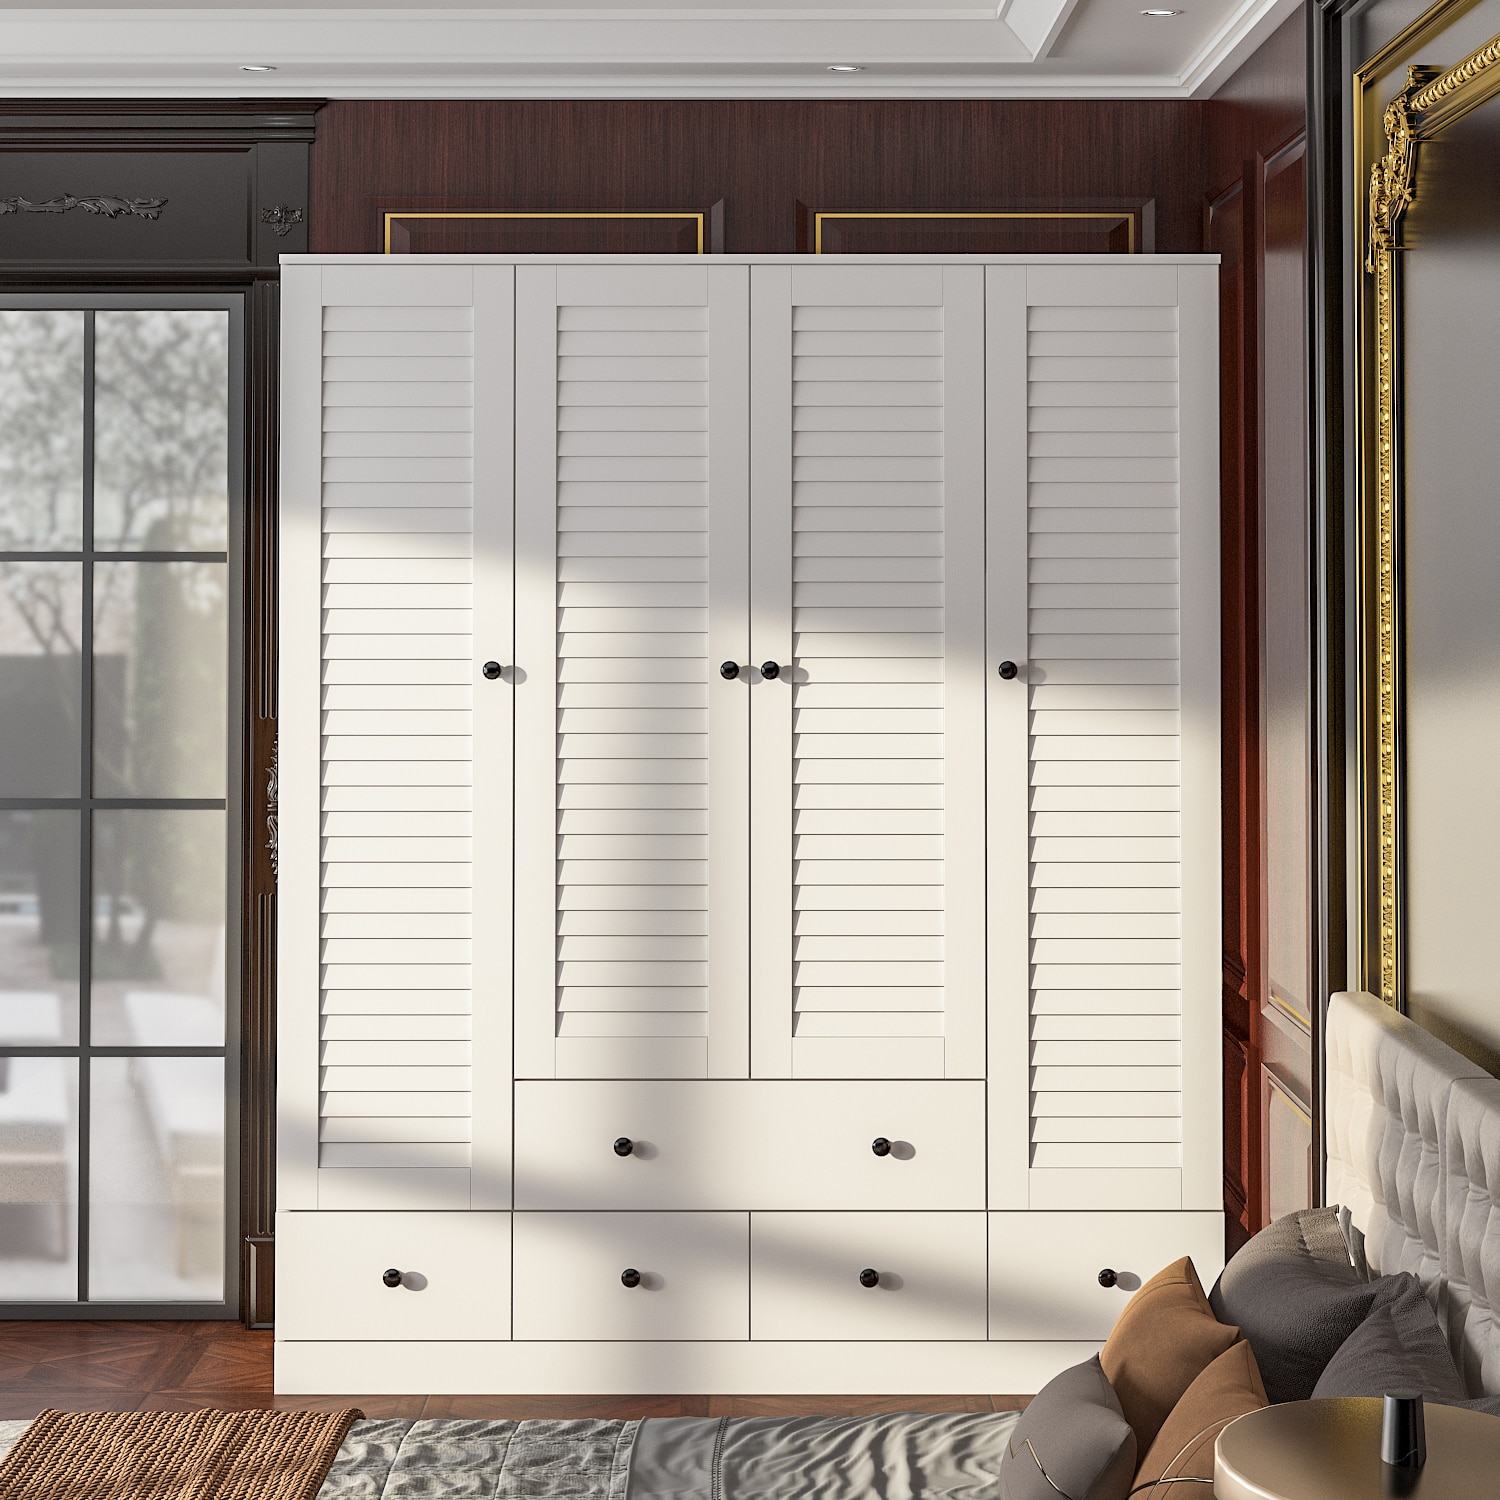 FUFU&GAGA Large Wardrobe Closet, 4-Door Armoire Storage Cabinet with  Hanging Rods and Shelves for Bedroom, White 